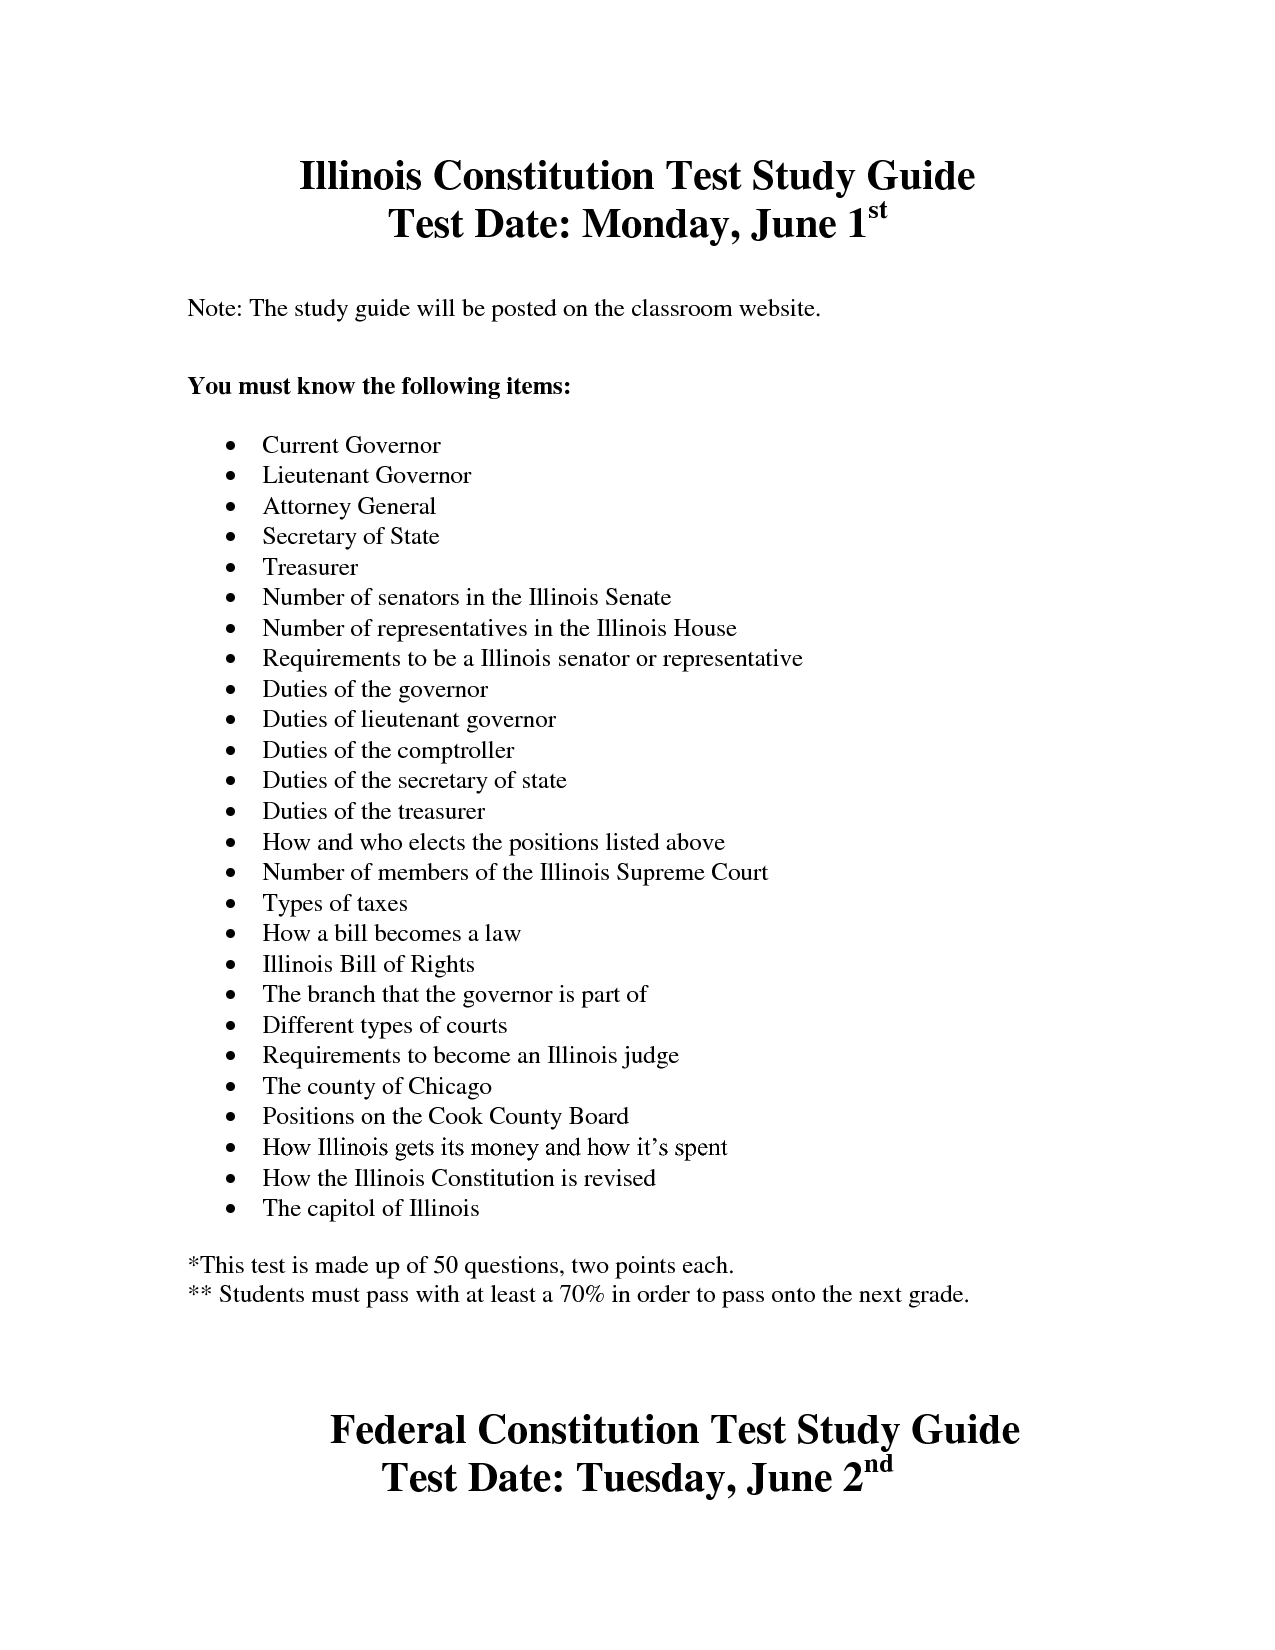 7th Grade Constitution Test Study Guide Image